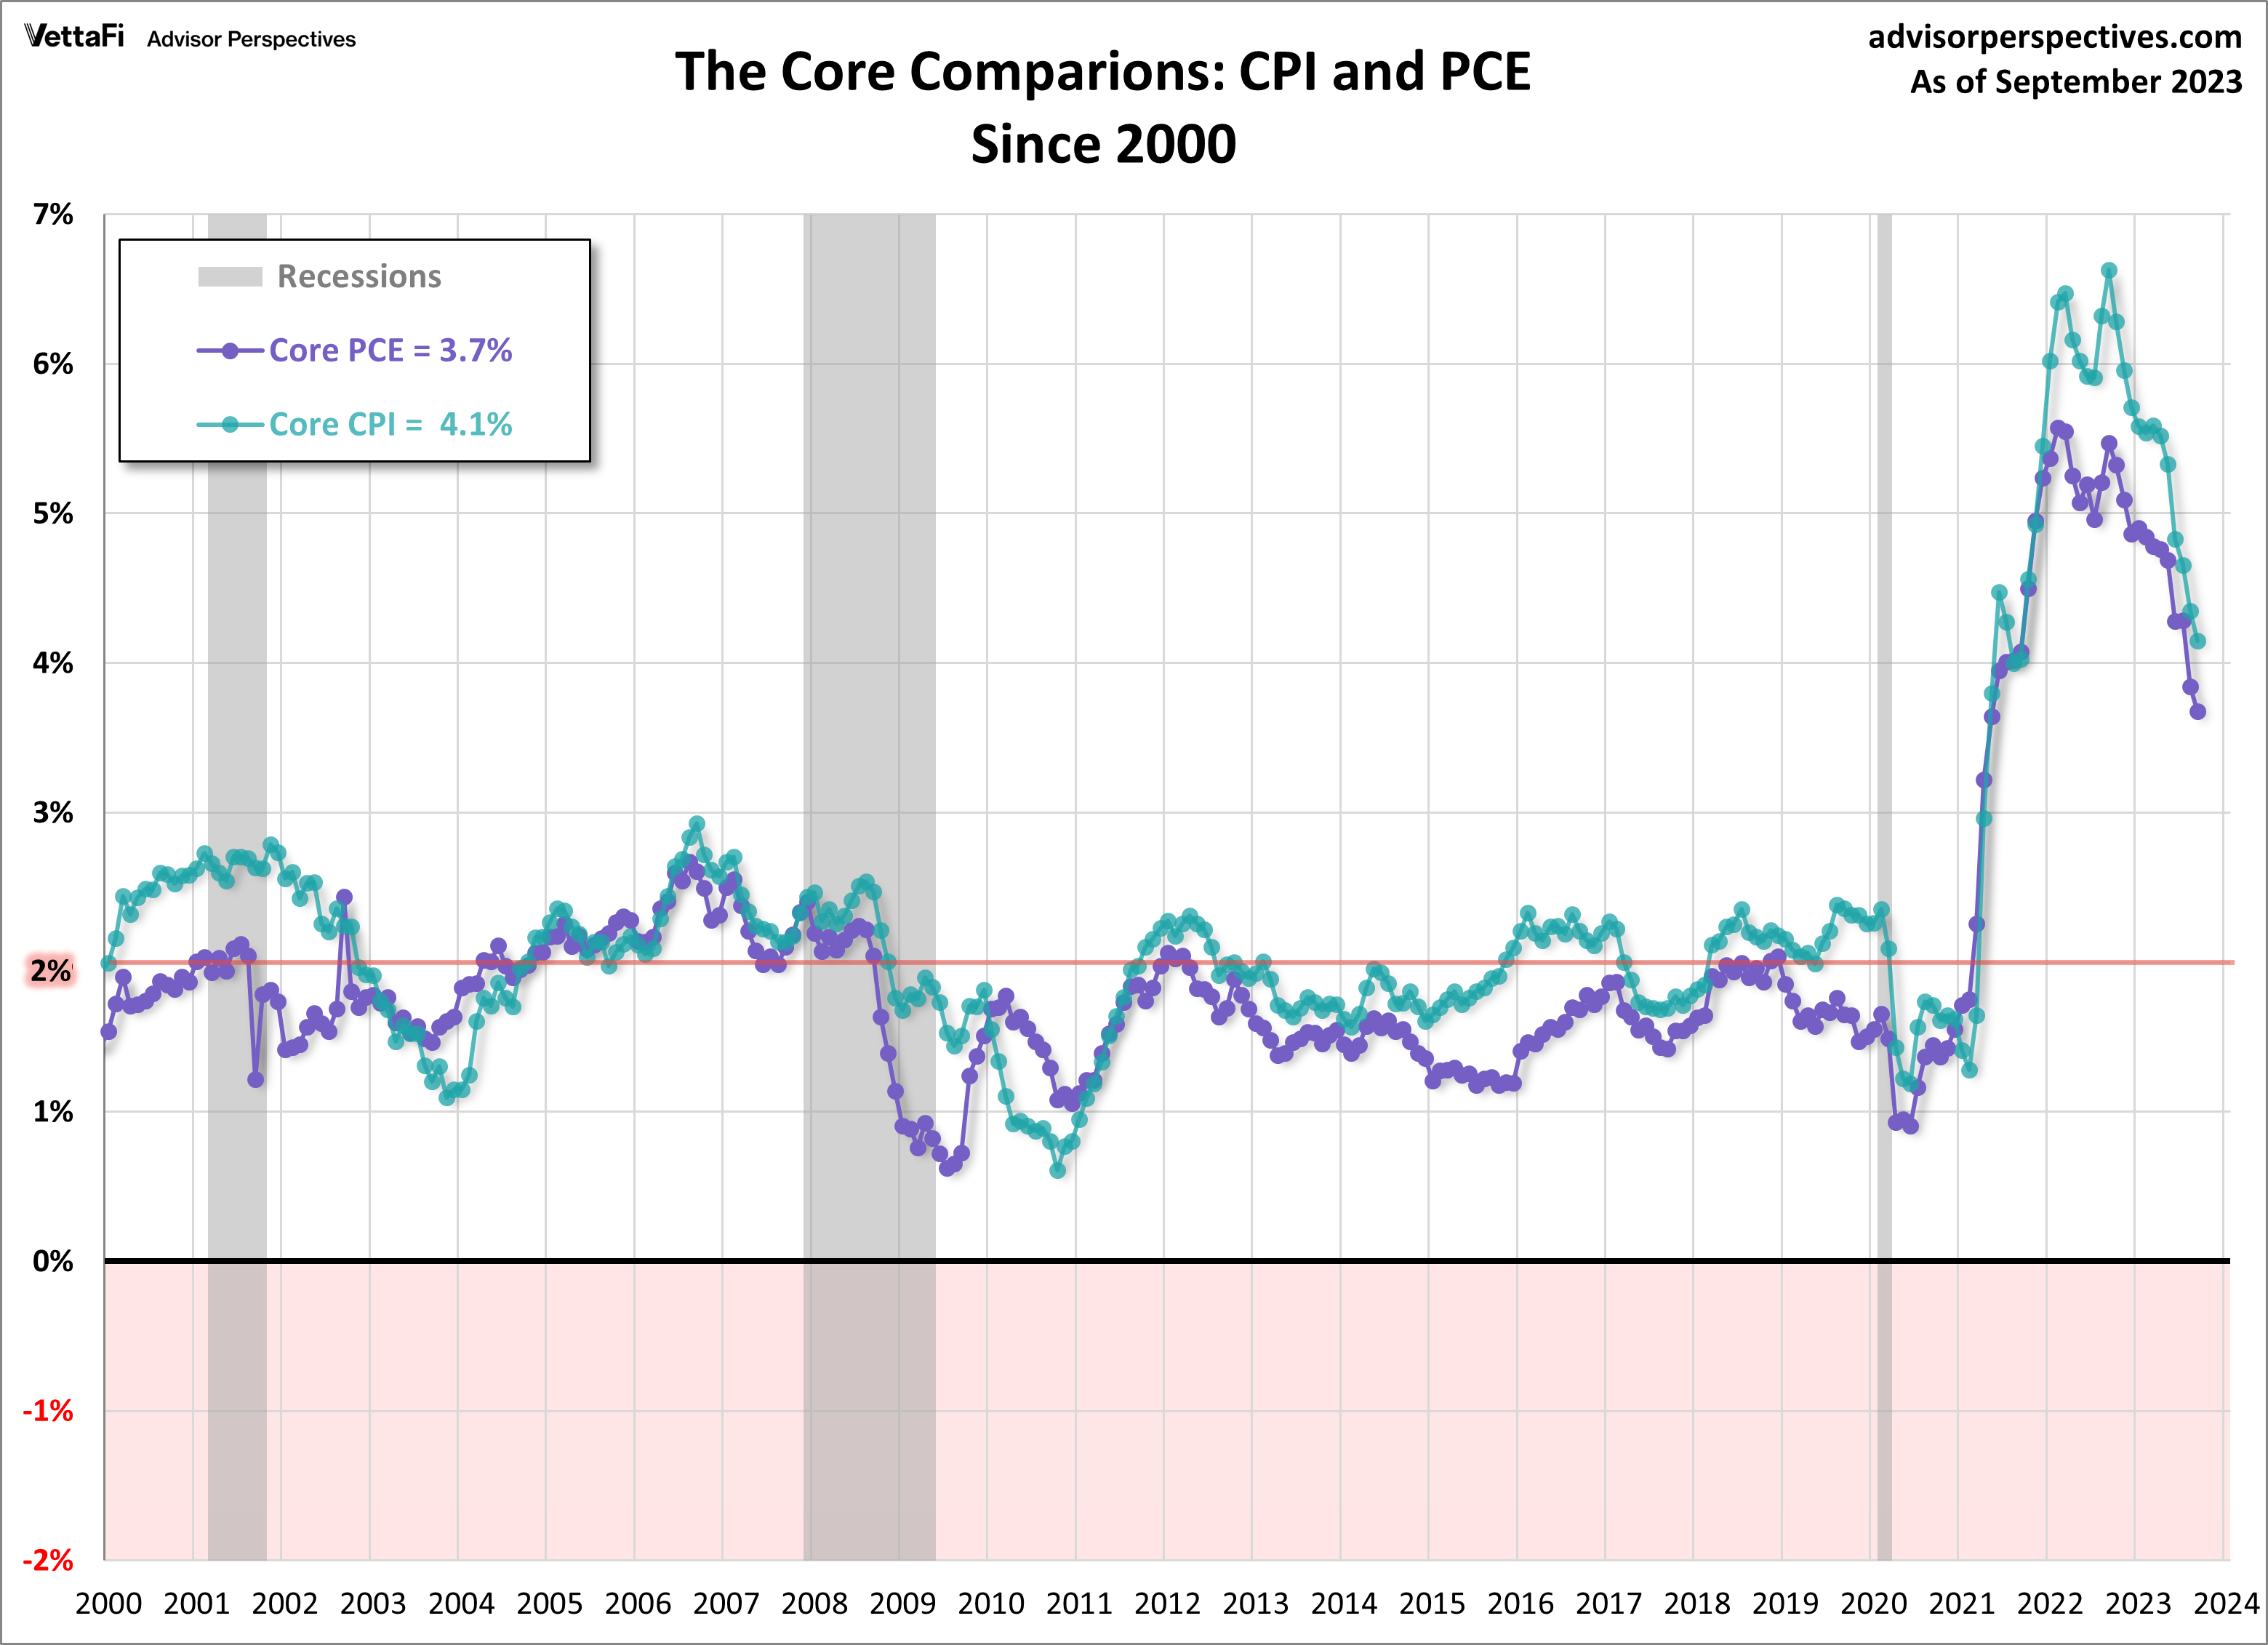 CPI and PCE Comparisons Since 2000